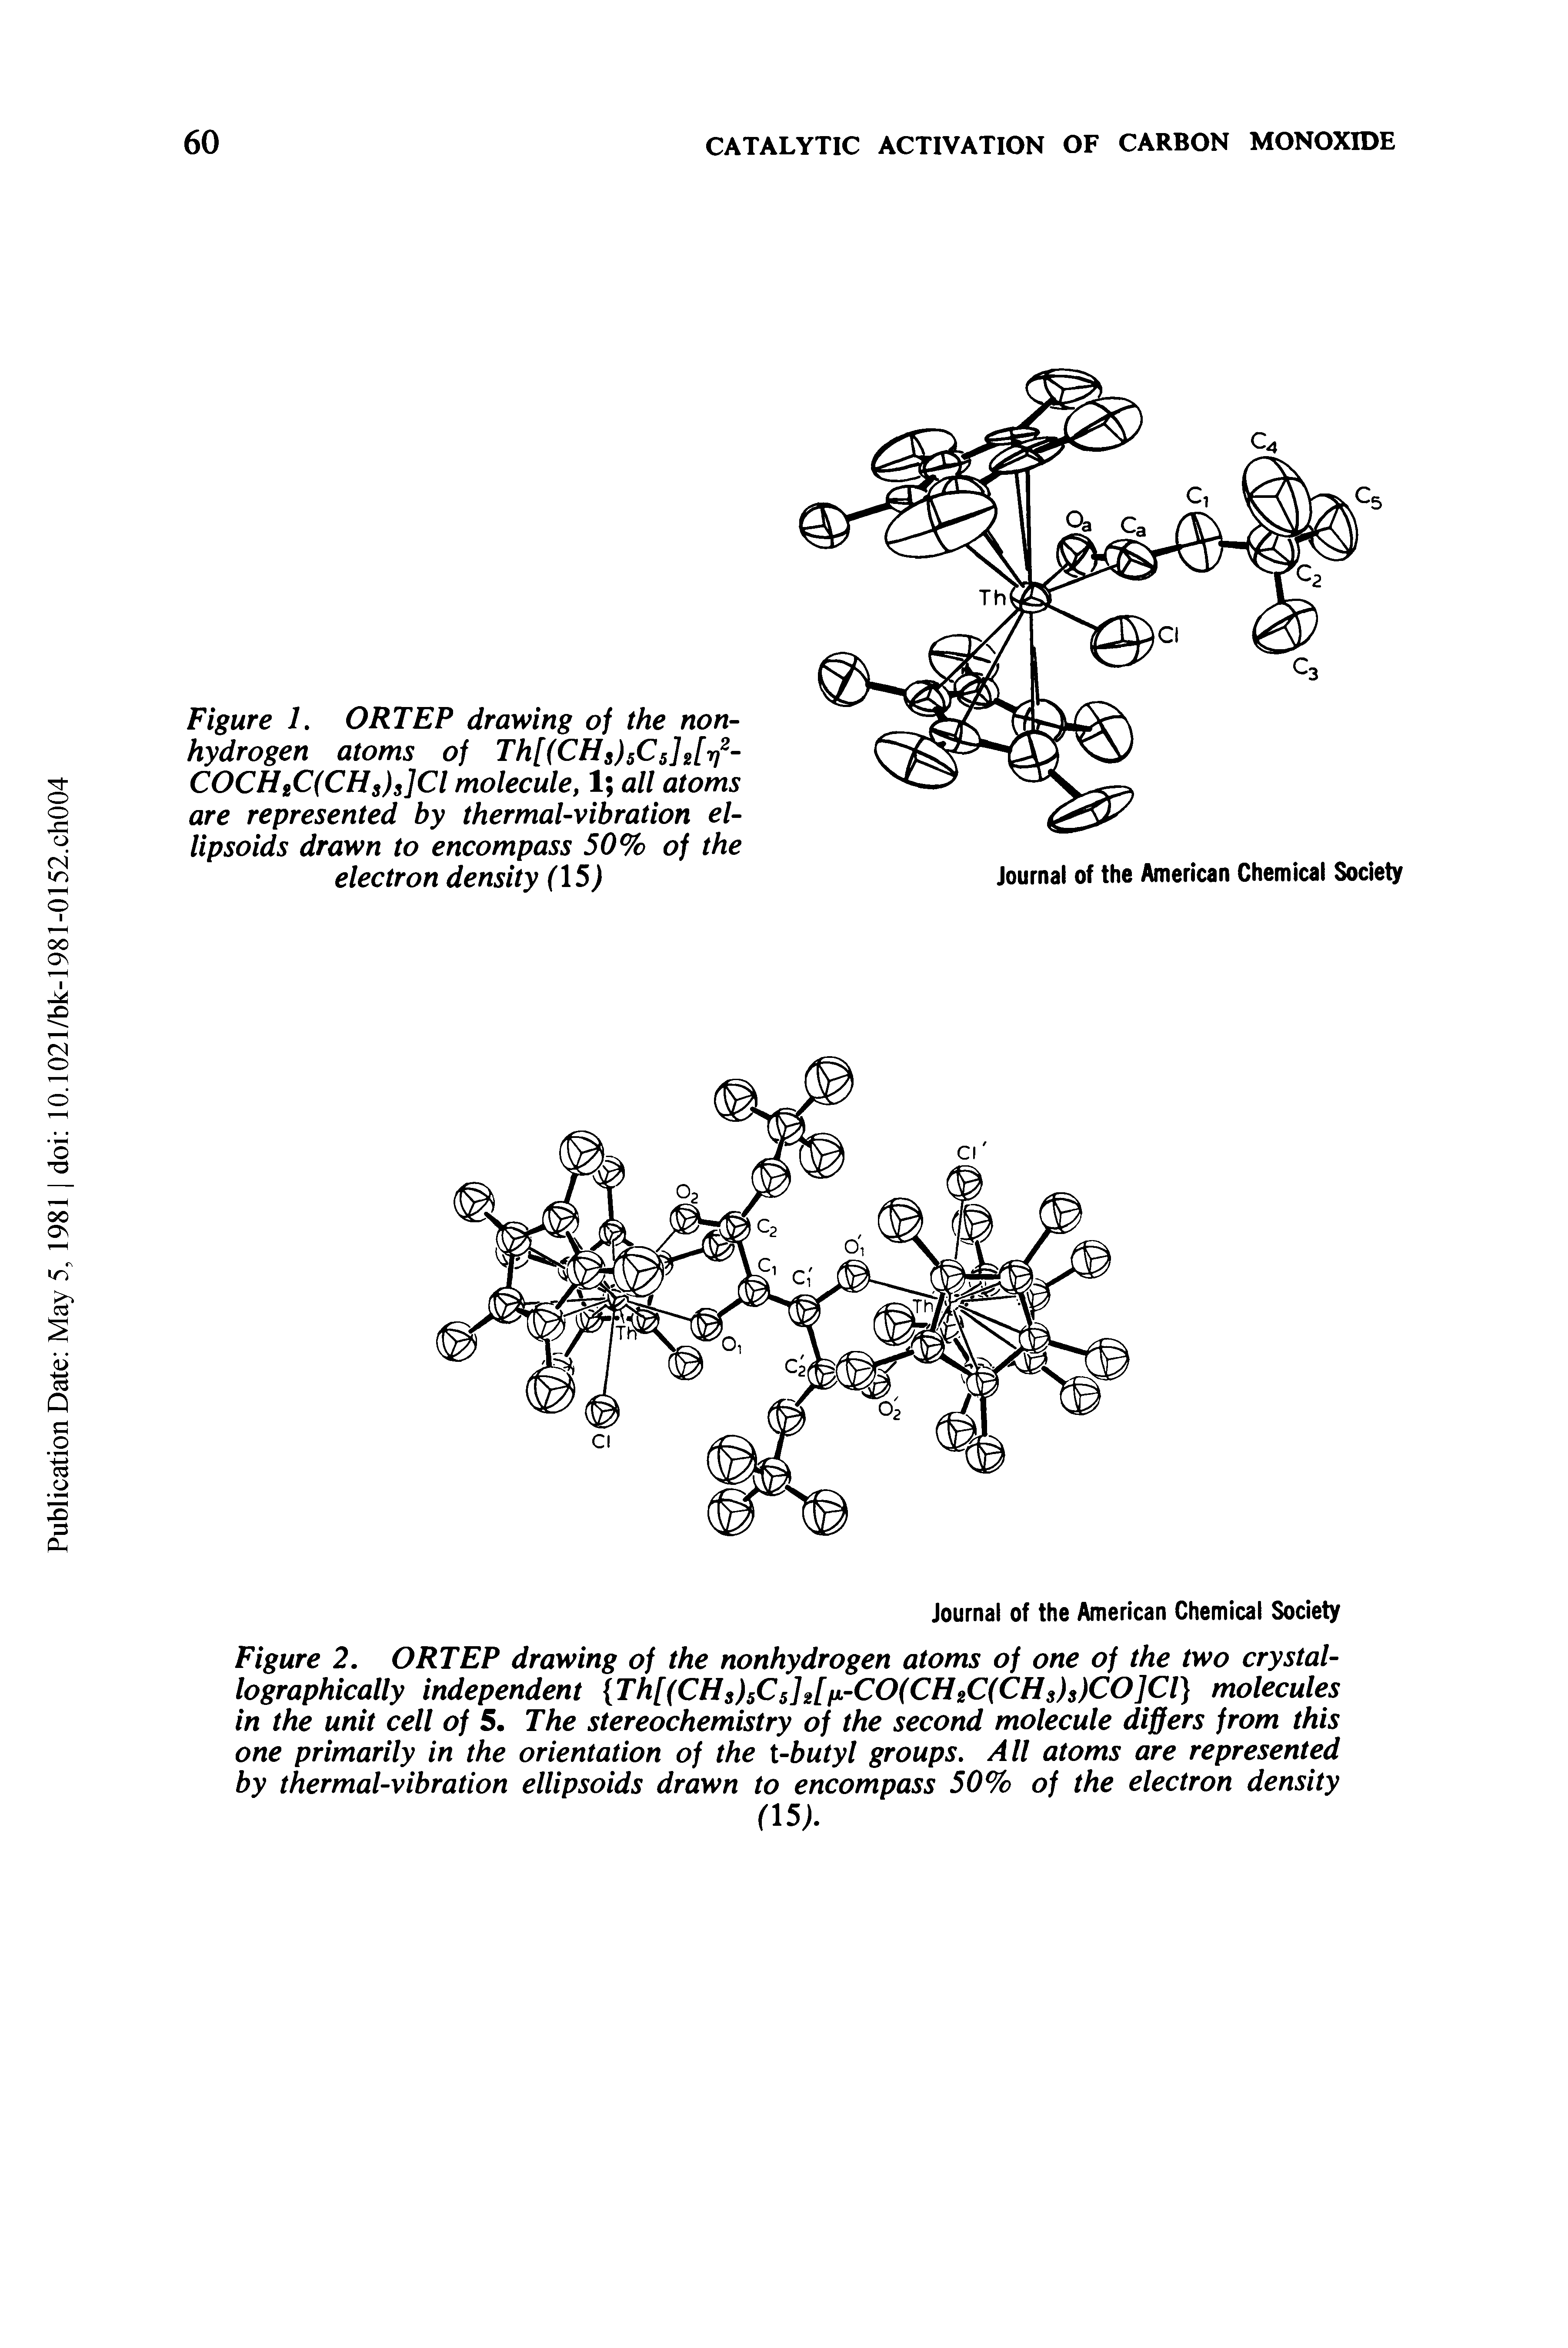 Figure 2. ORTEP drawing of the nonhydrogen atoms of one of the two crystal-lographically independent Th[(CHS)5C5]2[p-CO(CH2C(CHs)s)CO]Cl molecules in the unit cell of 5. The stereochemistry of the second molecule differs from this one primarily in the orientation of the t-butyl groups. All atoms are represented by thermal-vibration ellipsoids drawn to encompass 50% of the electron density...